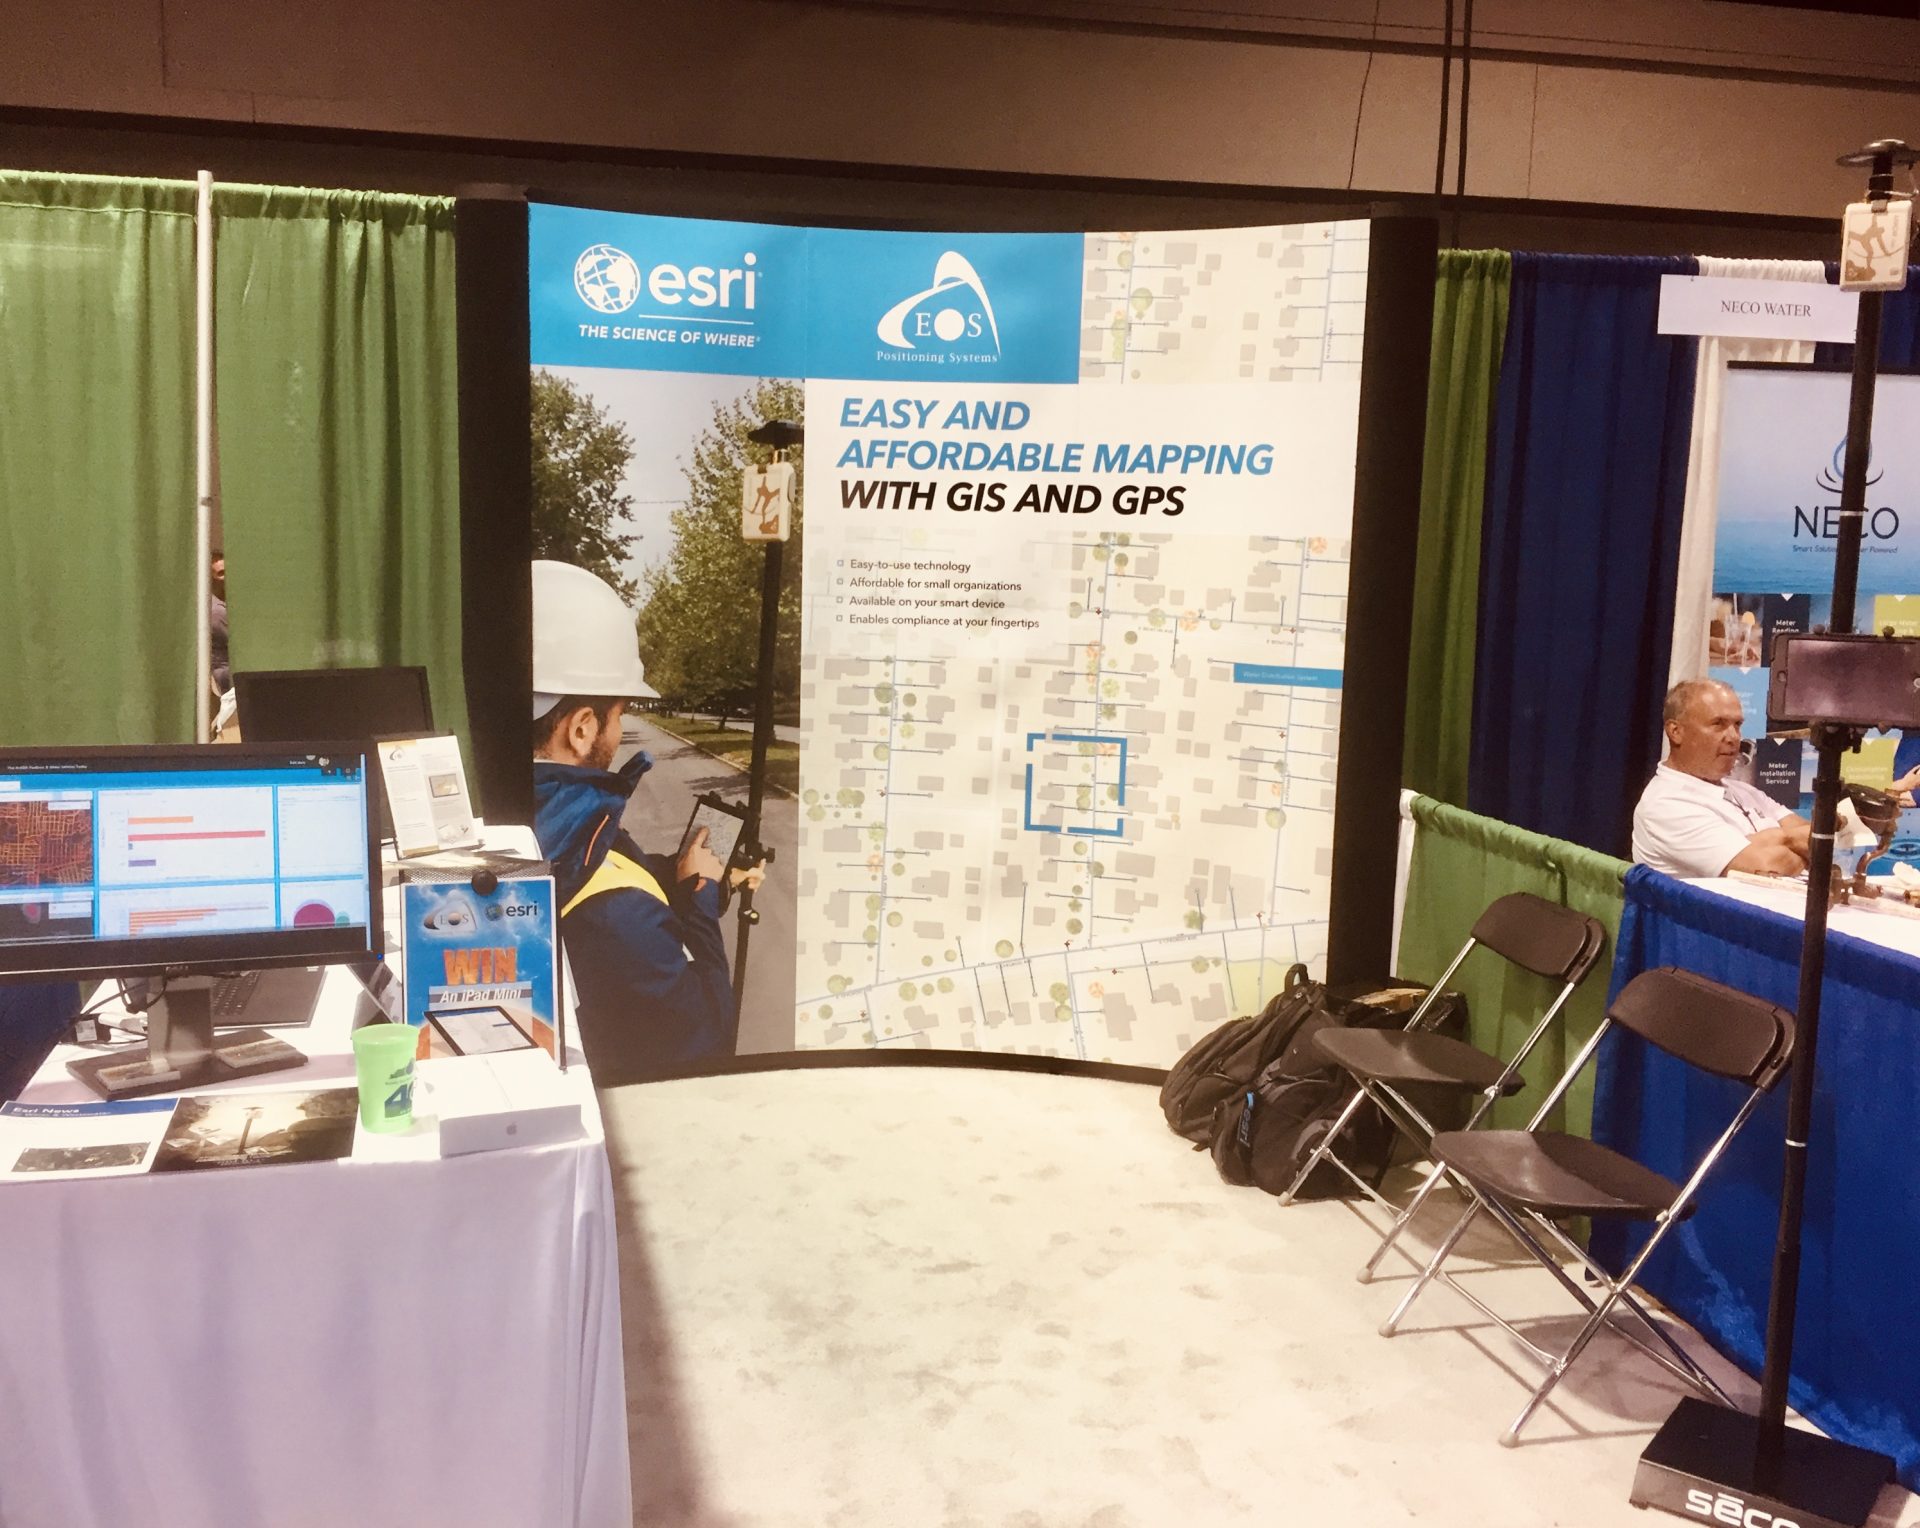 KY Rural Water Association Eos Esri Water booth 2019-08-26 18.22.10-1